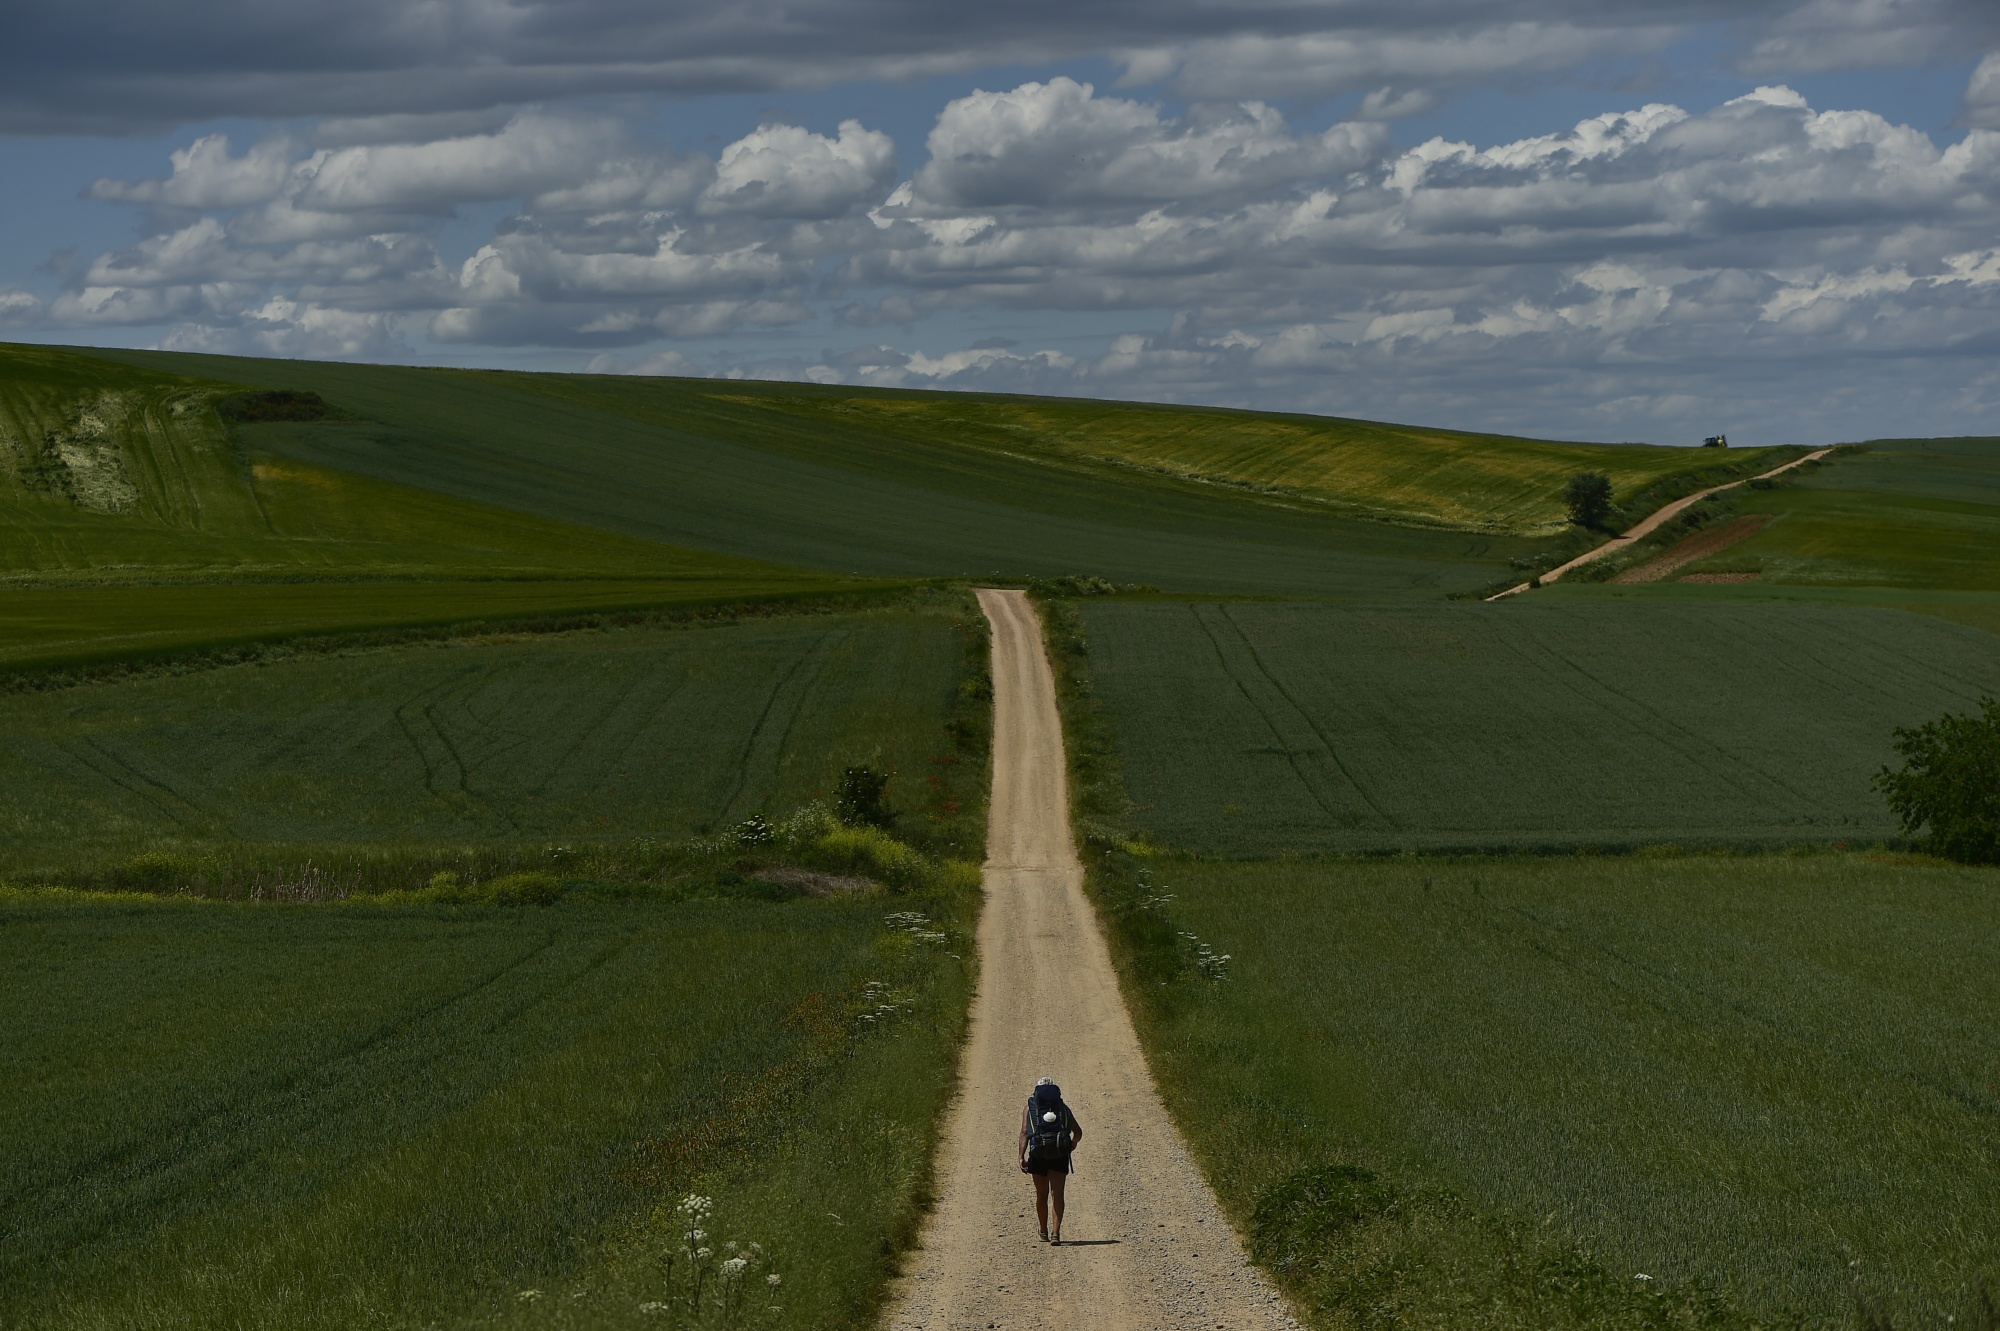 A pilgrim walks during a stage of &quot;Camino de Santiago&quot; or St. James Way near to Santo Domingo de La Calzada, northern Spain, Tuesday, May 31, 2022.  Over centuries, villages with magnificent artwork were built along the Camino de Santiago, a 500-mile pilgrimage route crossing Spain. Today, Camino travelers are saving those towns from disappearing, rescuing the economy and vitality of hamlets that were steadily losing jobs and population. “The Camino is life,” say villagers along the route. (AP Photo/Alvaro Barrientos)